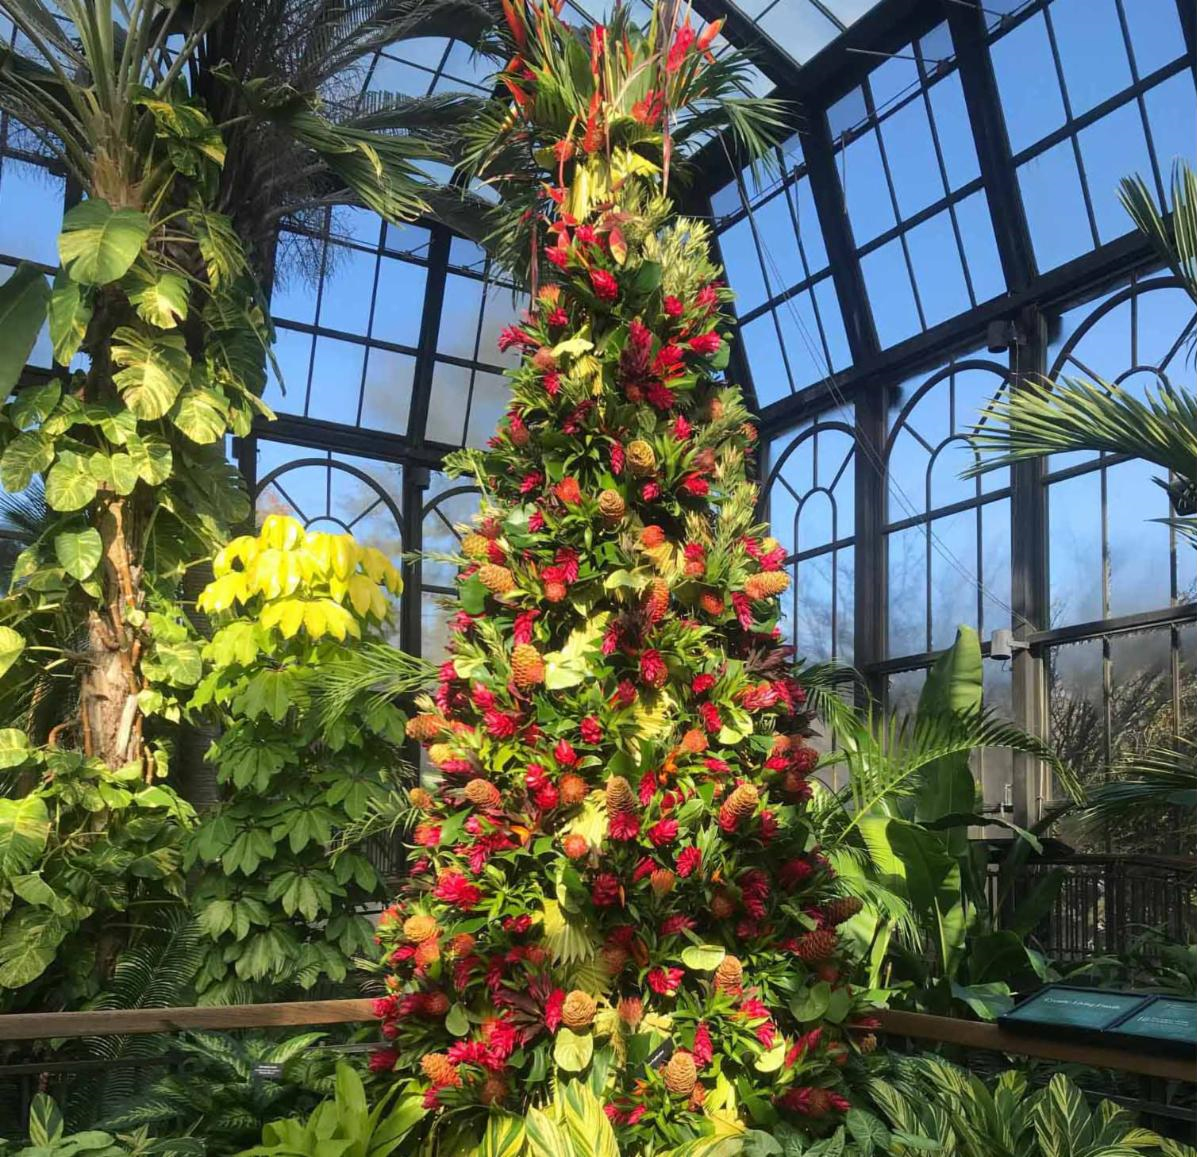 stylized tower of tropical foliage and flowers in the shape of a Christmas tree in the conservatory at Longwood Gardens